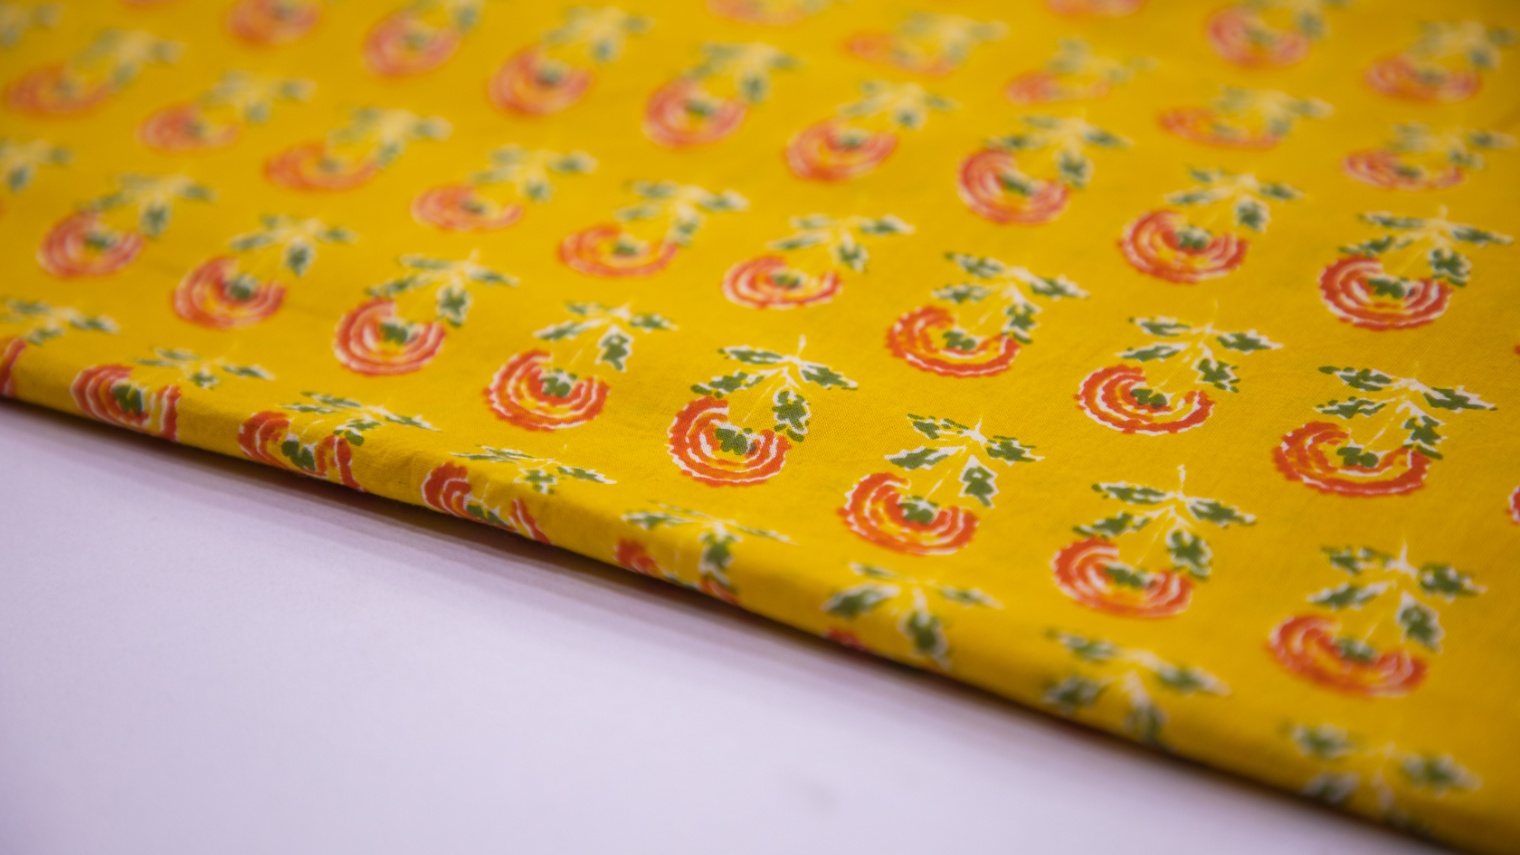 SUNFLOWER YELLOW COLOR COTTON SCREEN PRINT RED FLORAL JAIPURI MOTIF FABRIC - 5831